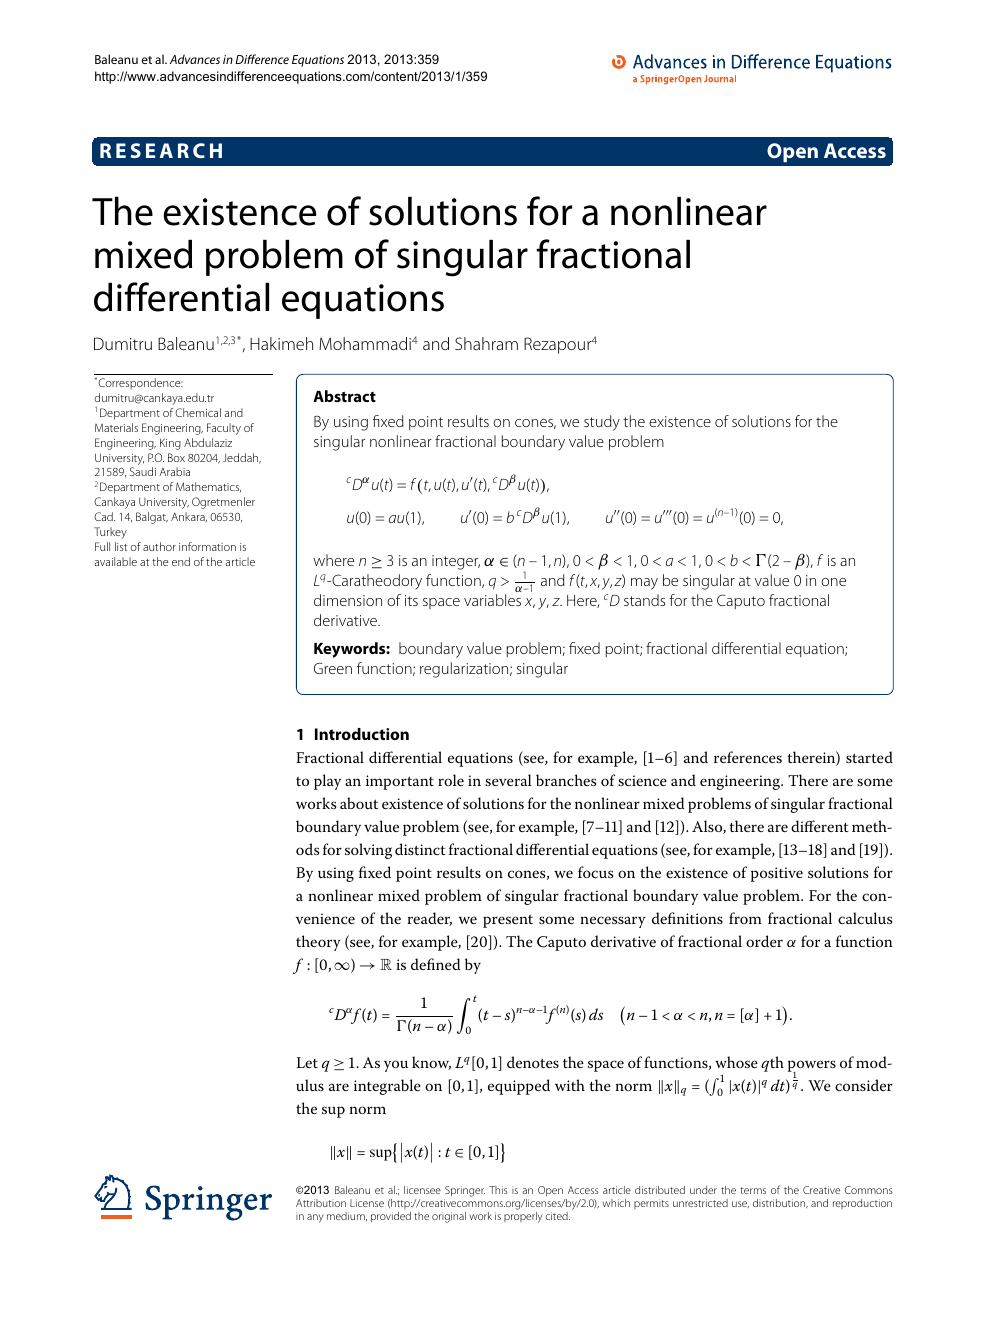 The Existence Of Solutions For A Nonlinear Mixed Problem Of Singular Fractional Differential Equations Topic Of Research Paper In Mathematics Download Scholarly Article Pdf And Read For Free On Cyberleninka Open